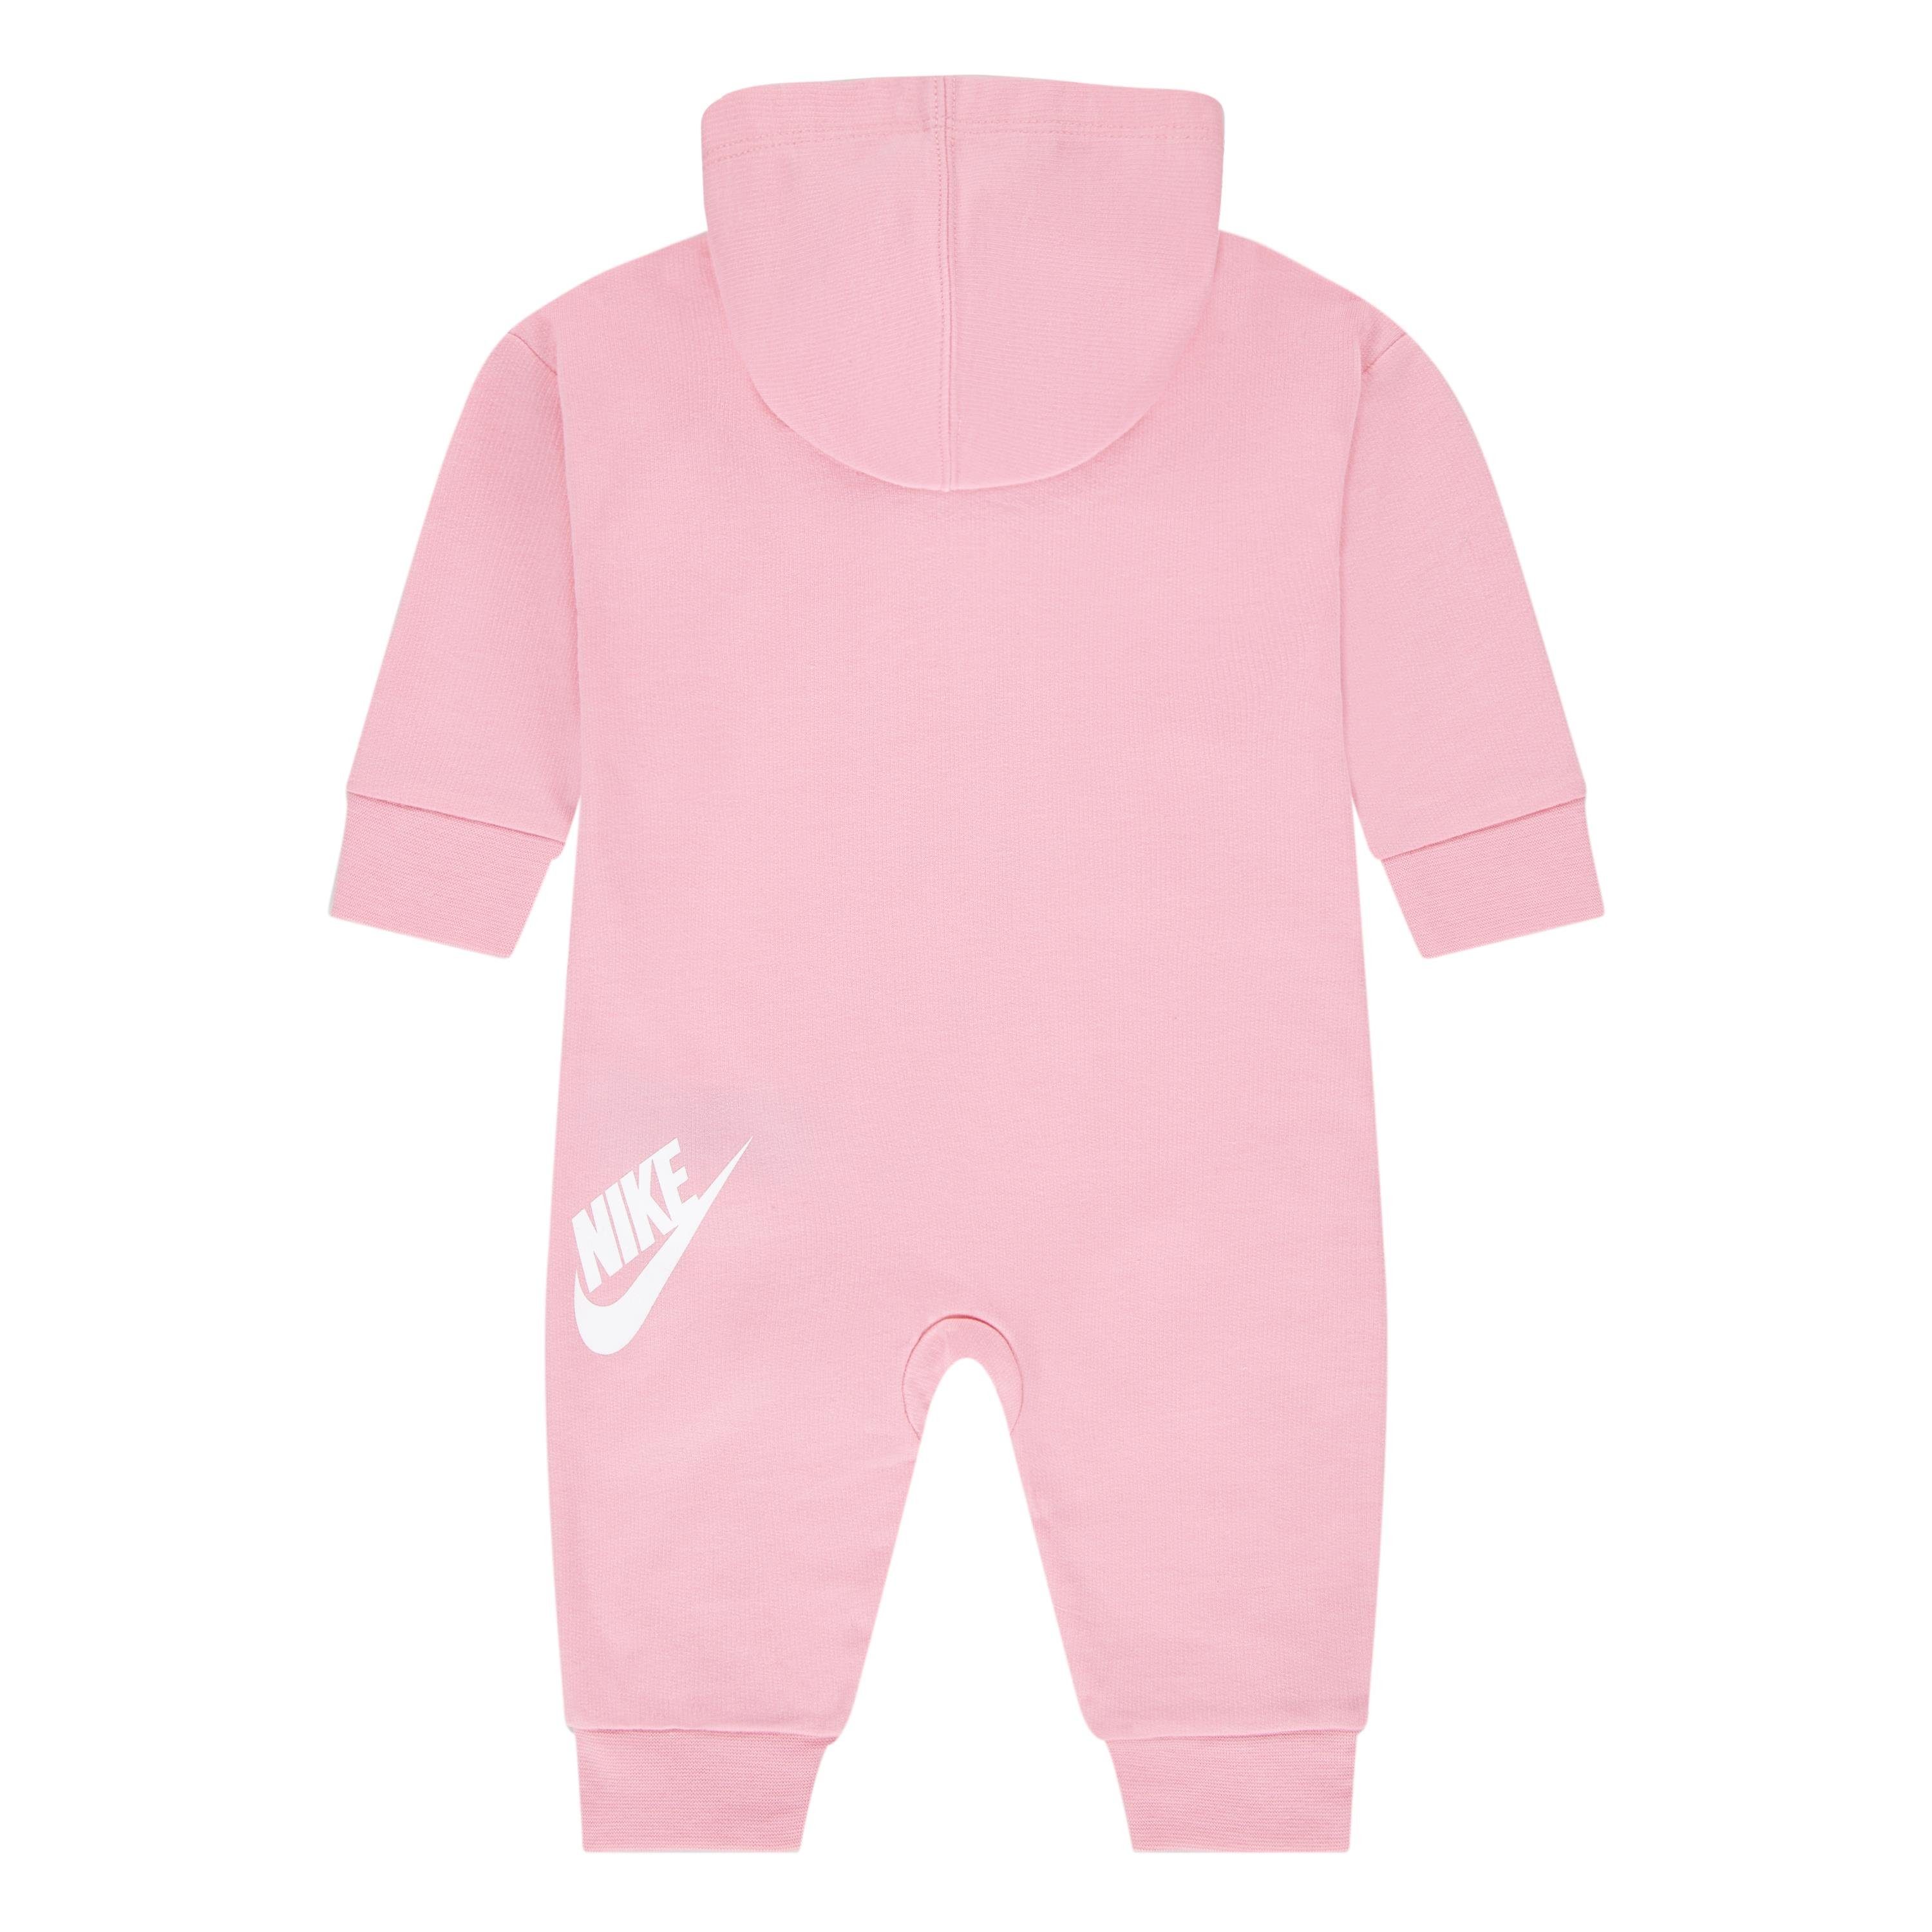 Nike Sportswear Strampler ALL COVERALL PLAY DAY NKN rosa-weiß